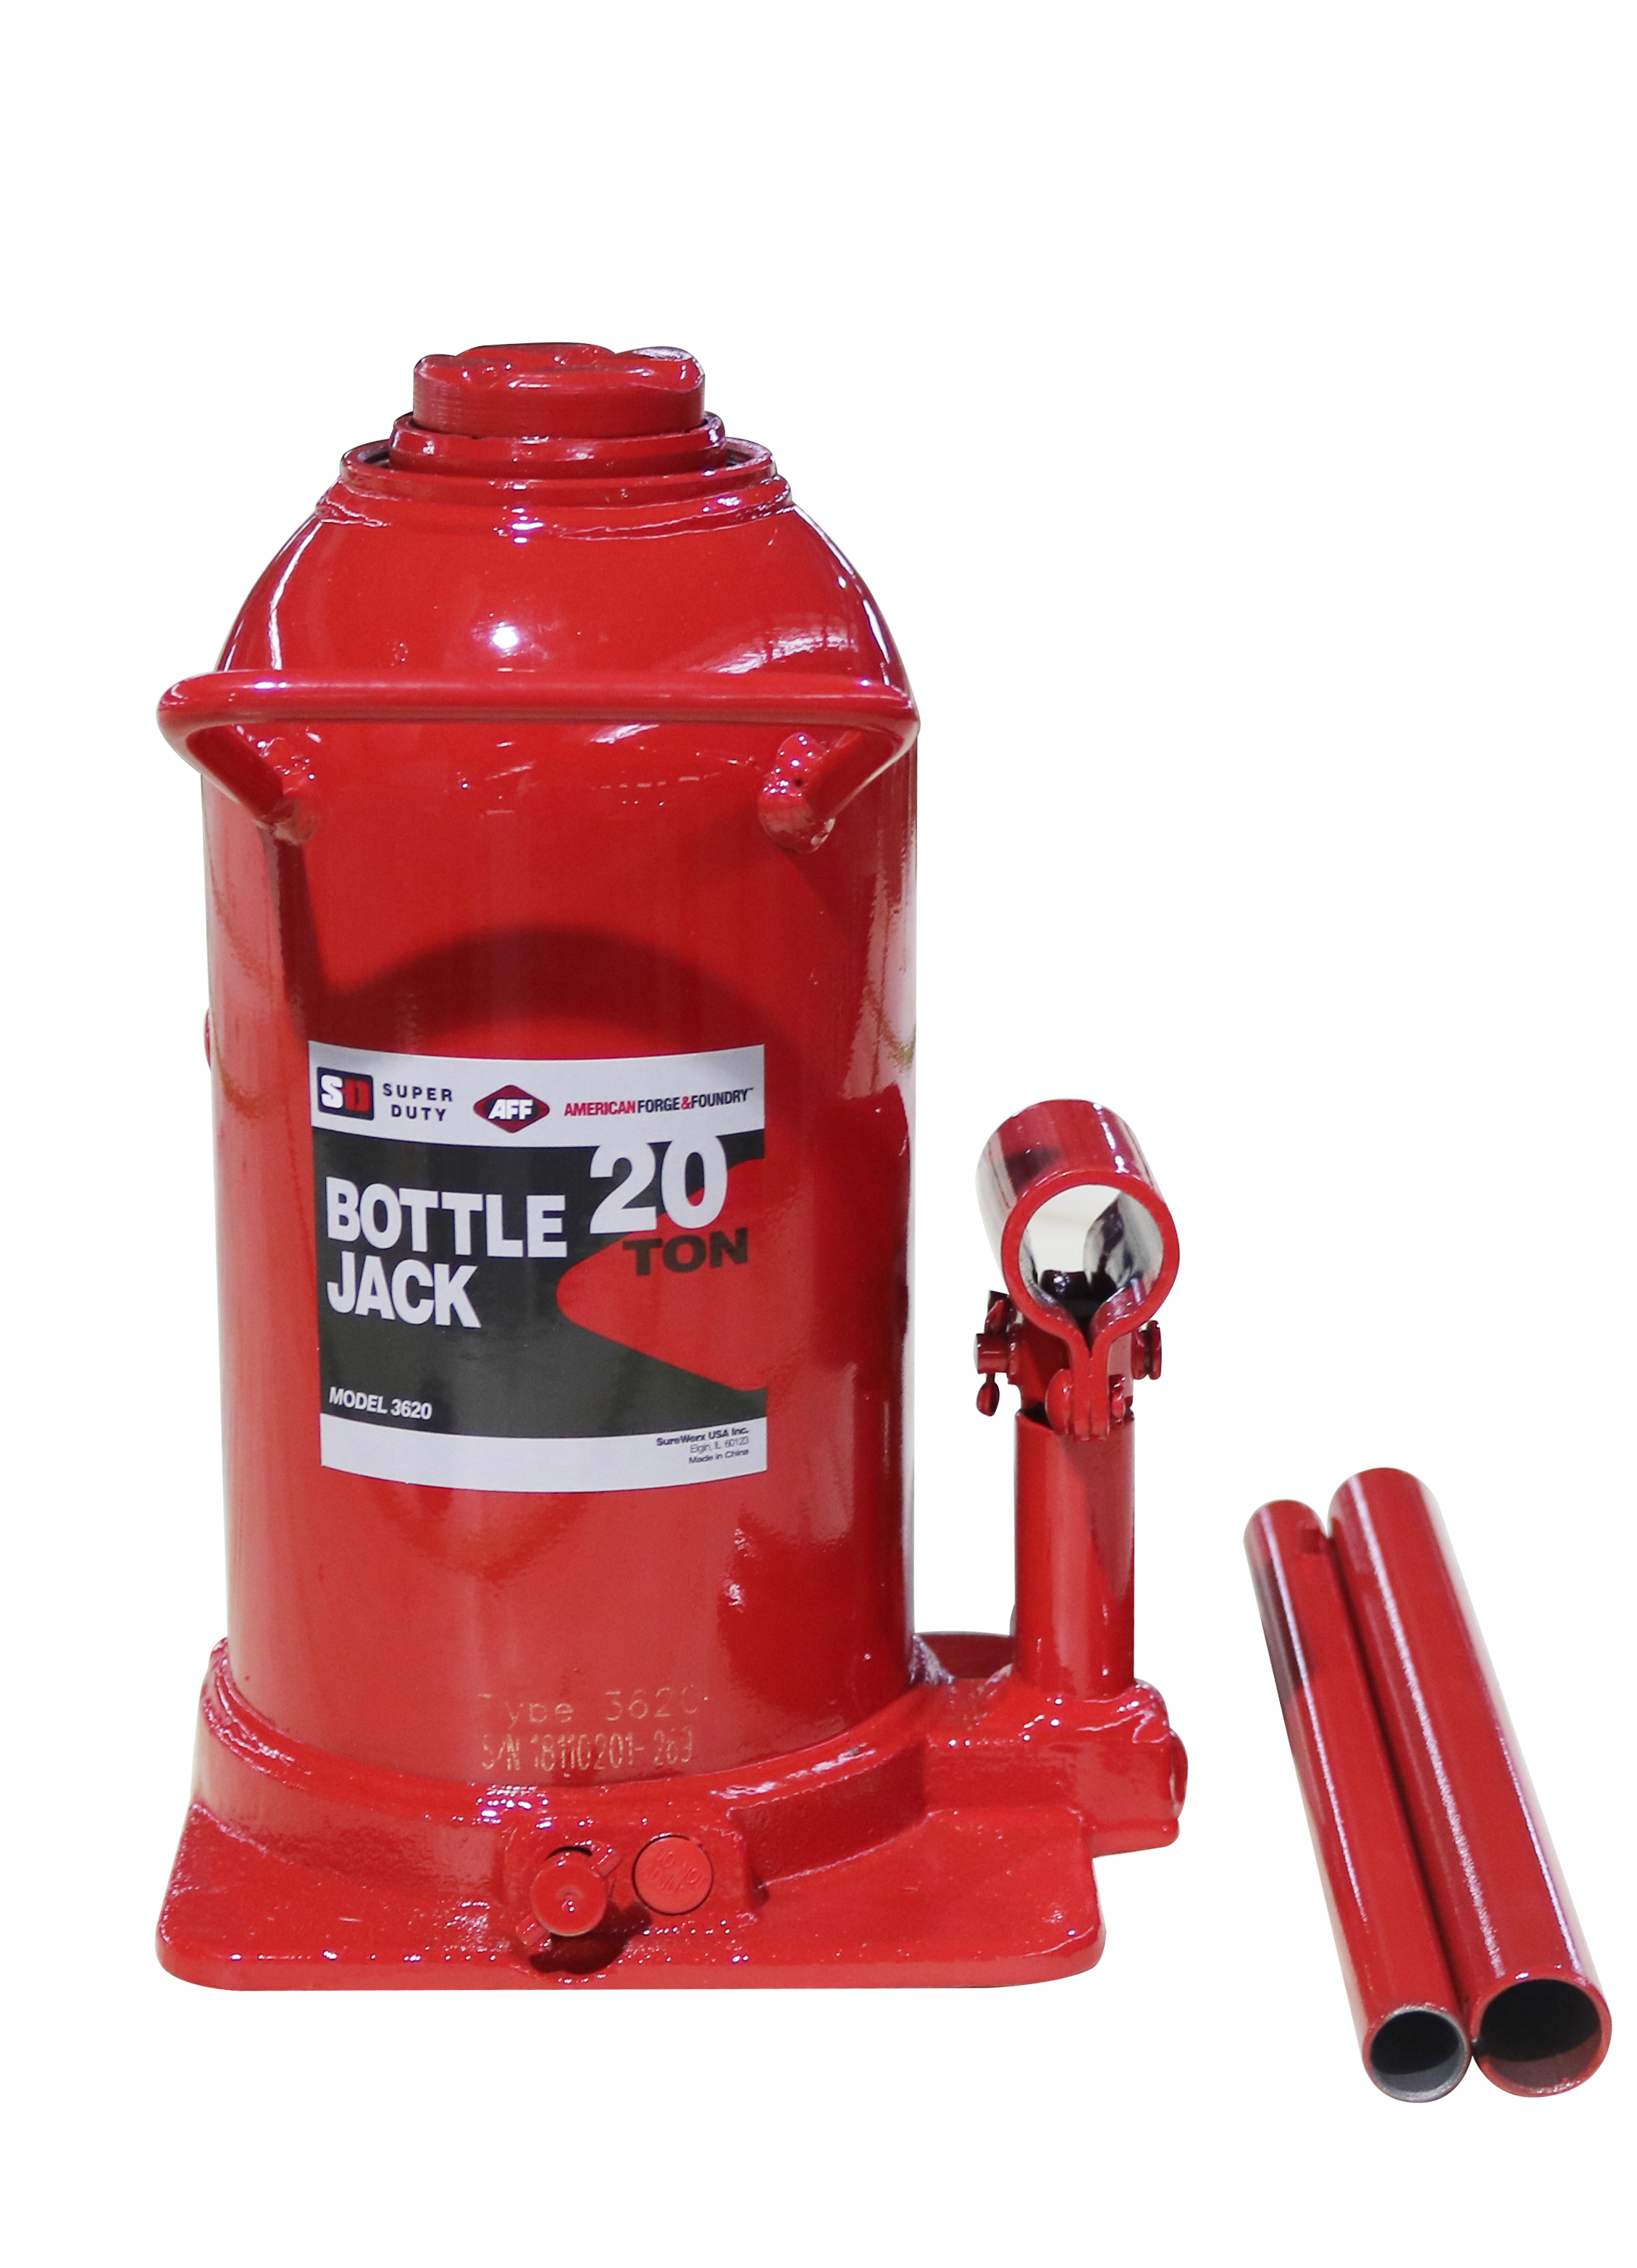 American Forge and Foundry - 20 TON SUPER DUTY BOTTLE JACK -  3620